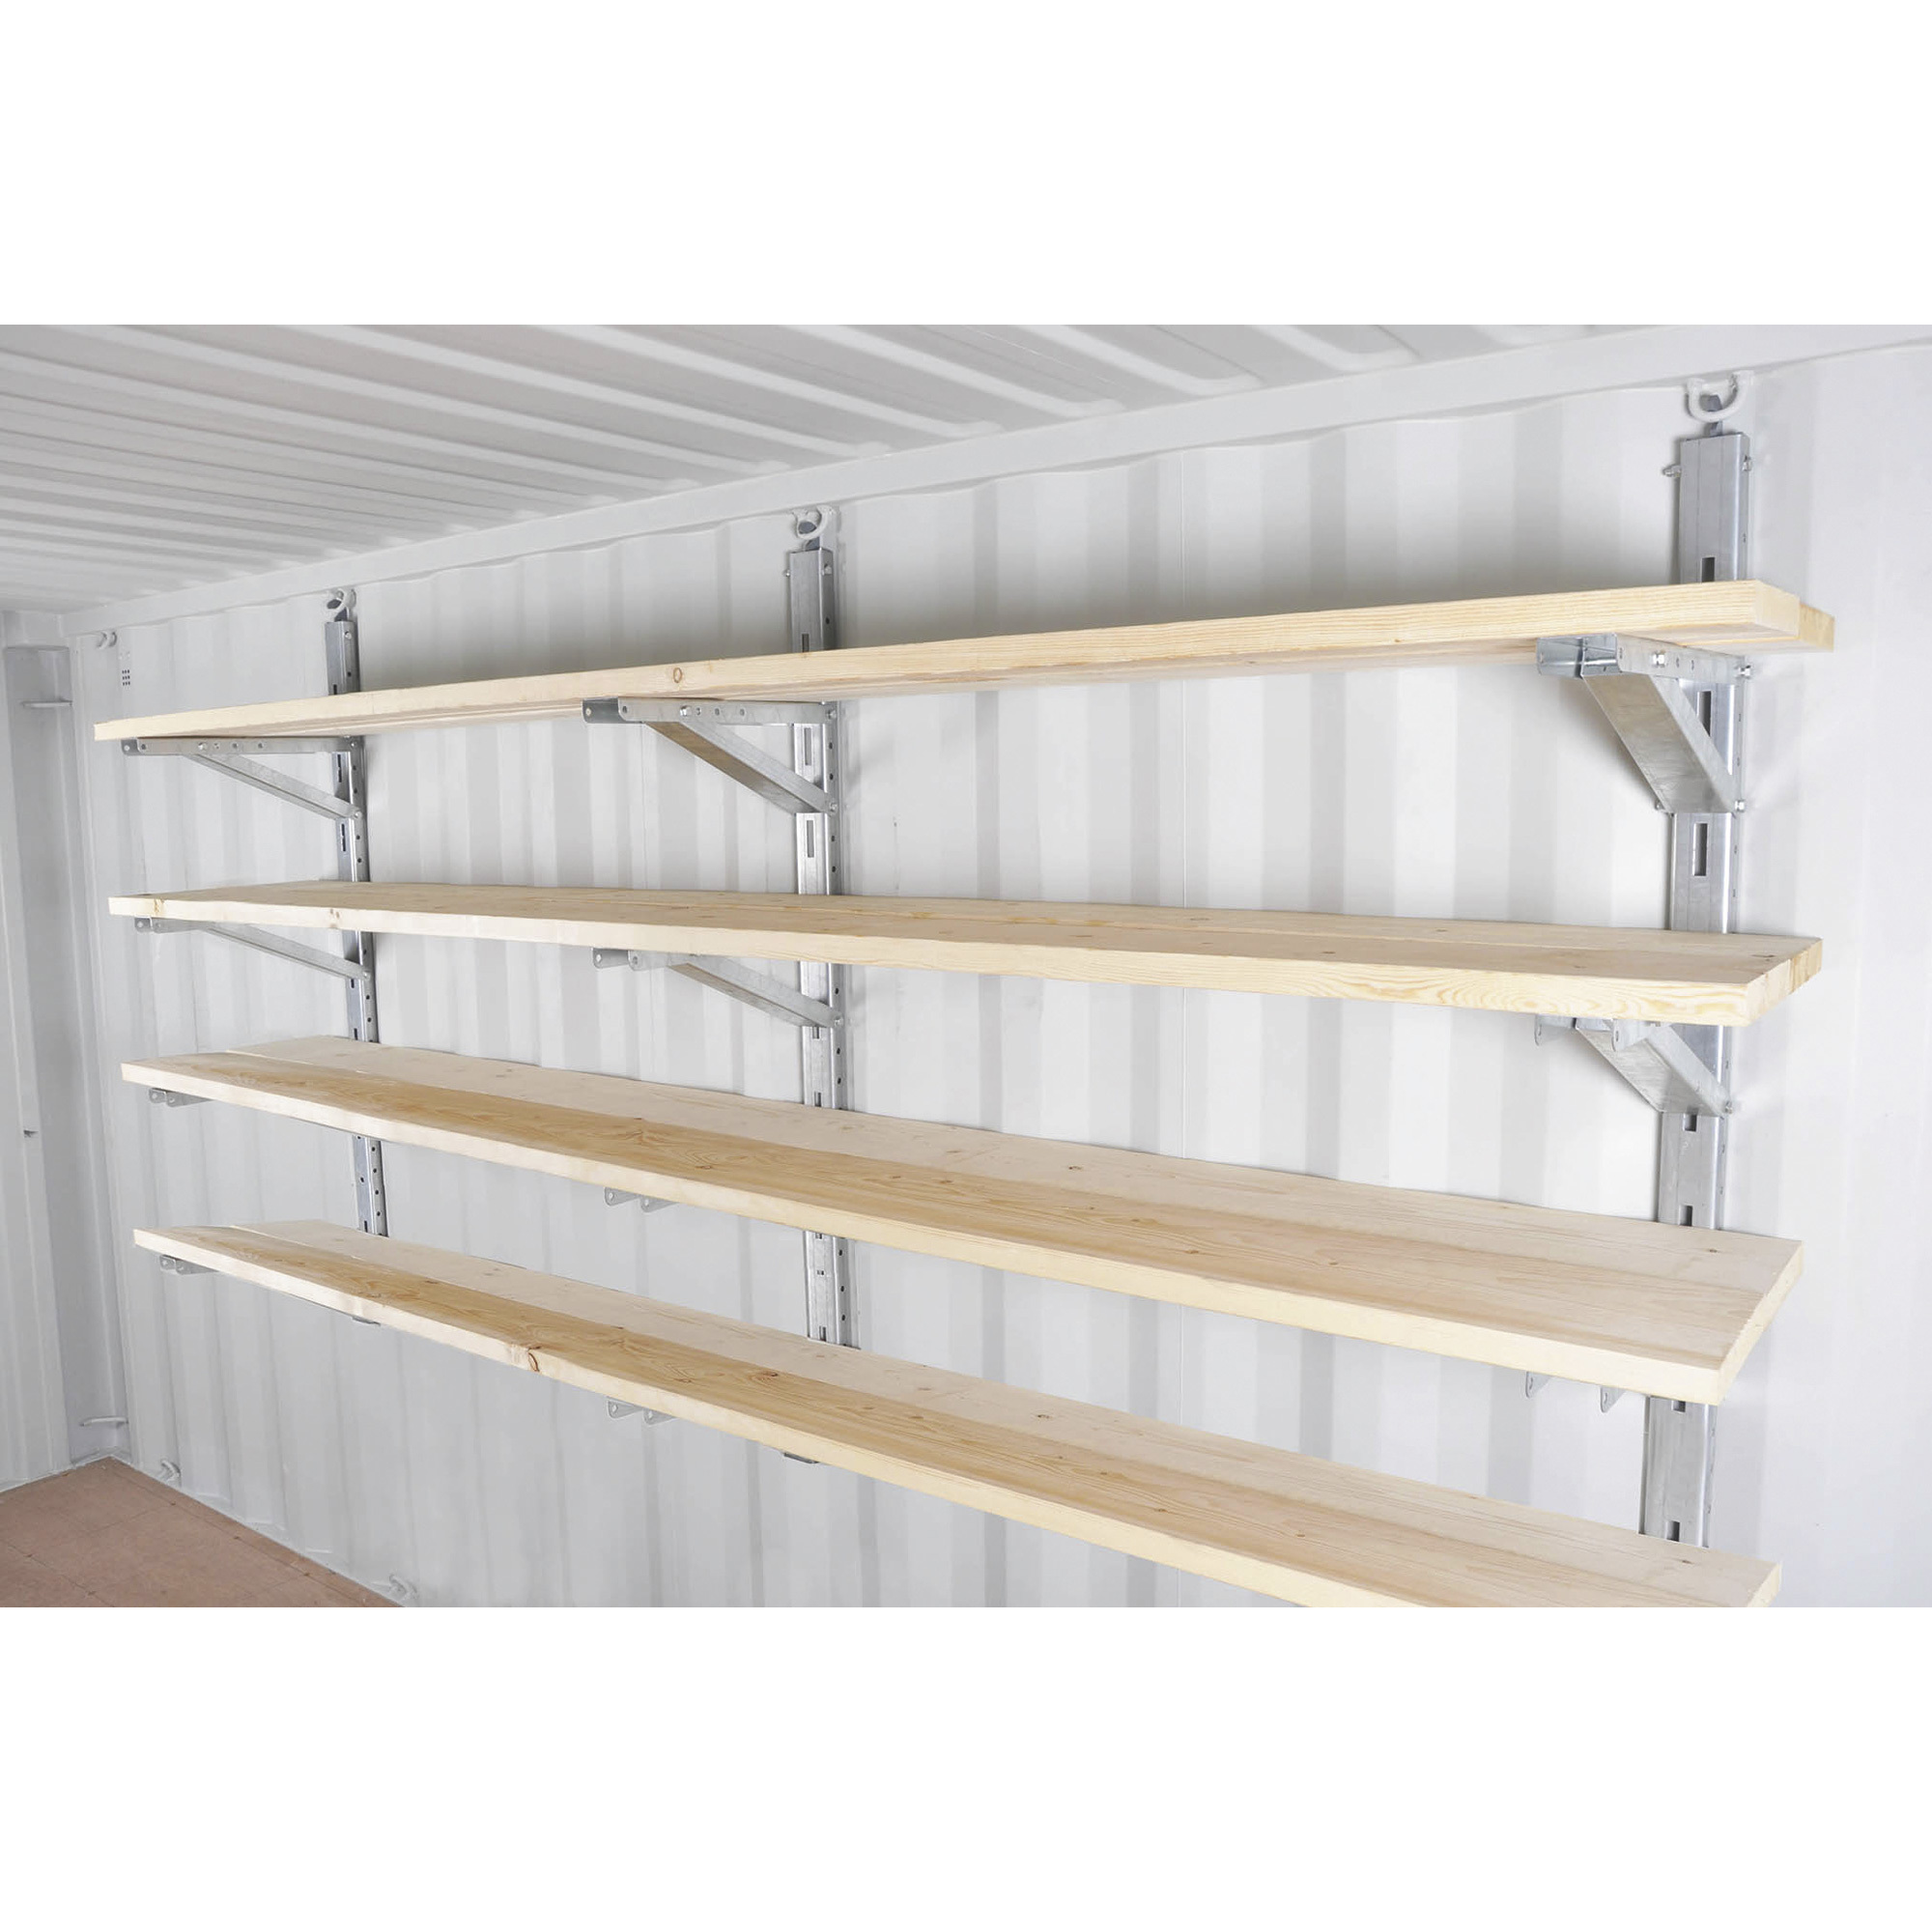 Western Steel & Tube Container Shelving Kit â 4 Level, Model 1411